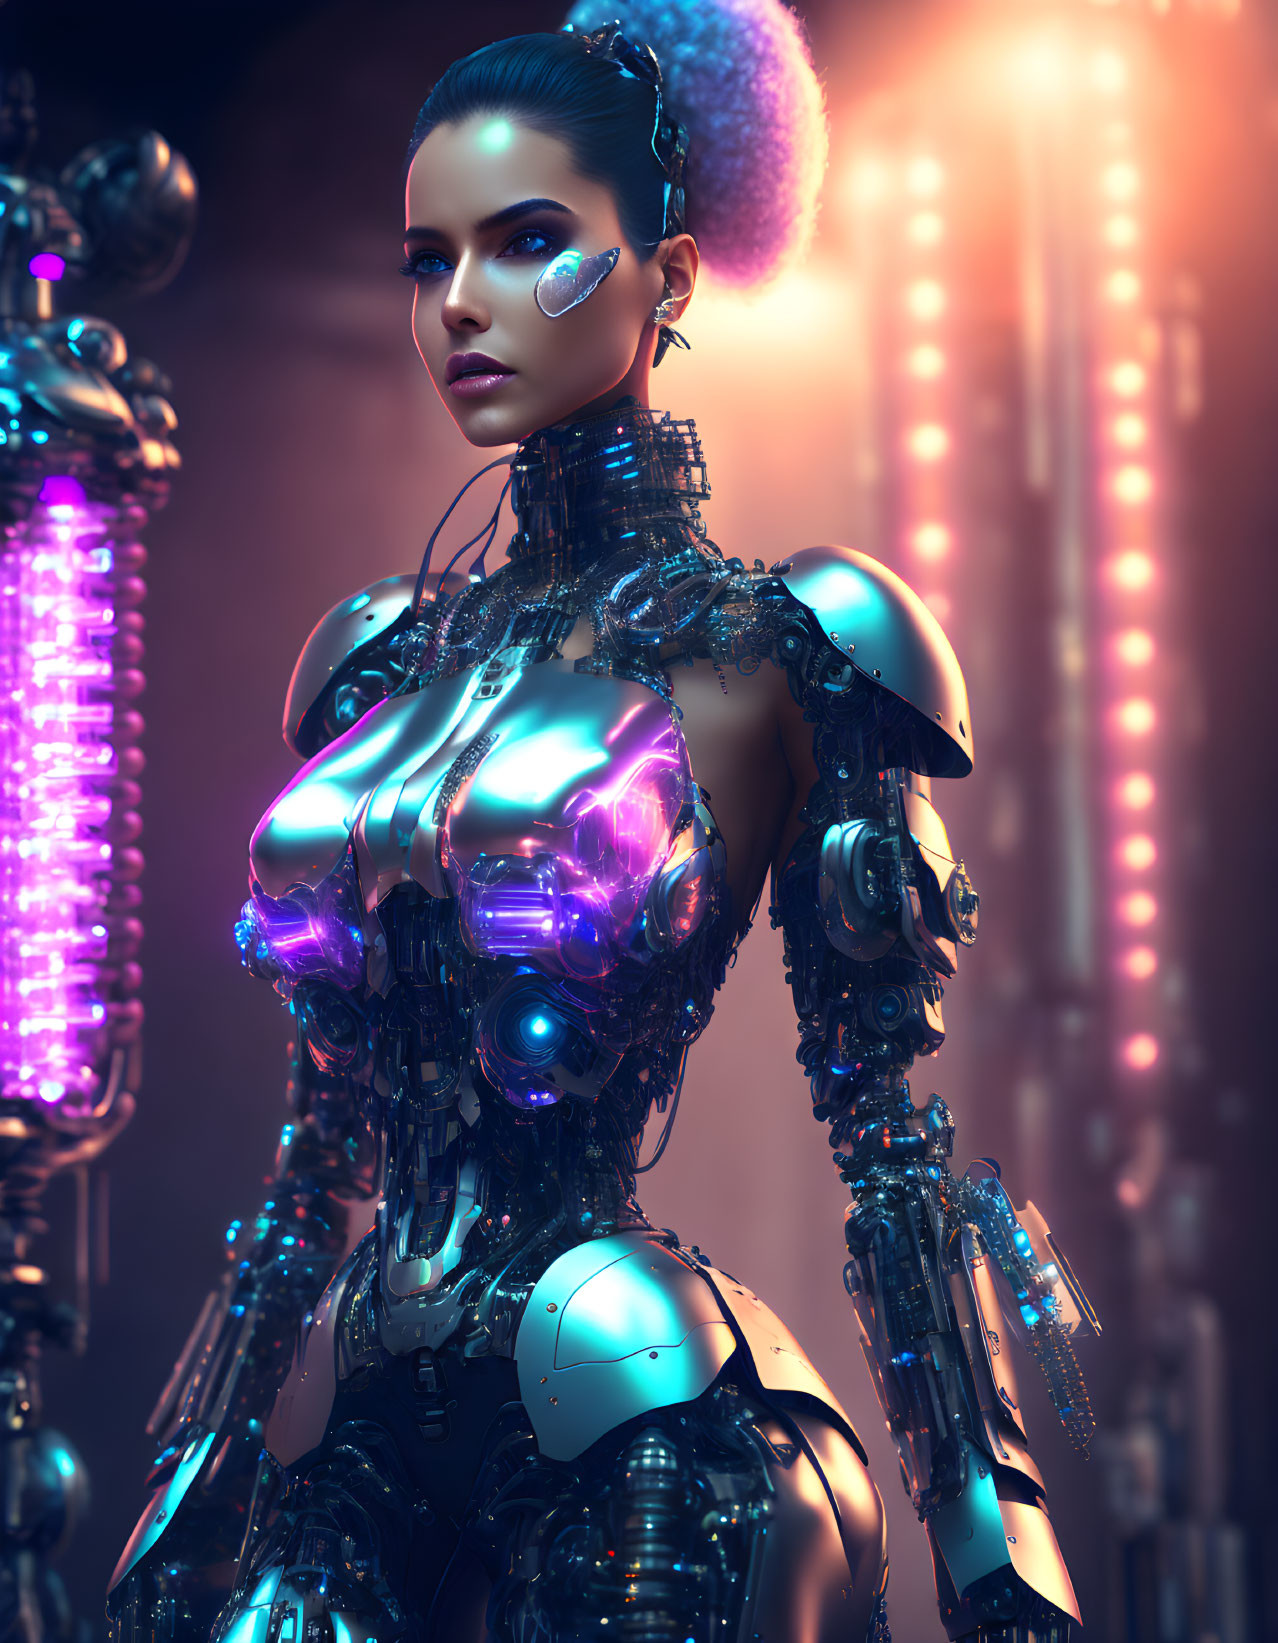 Futuristic female android in metallic armor with purple accents